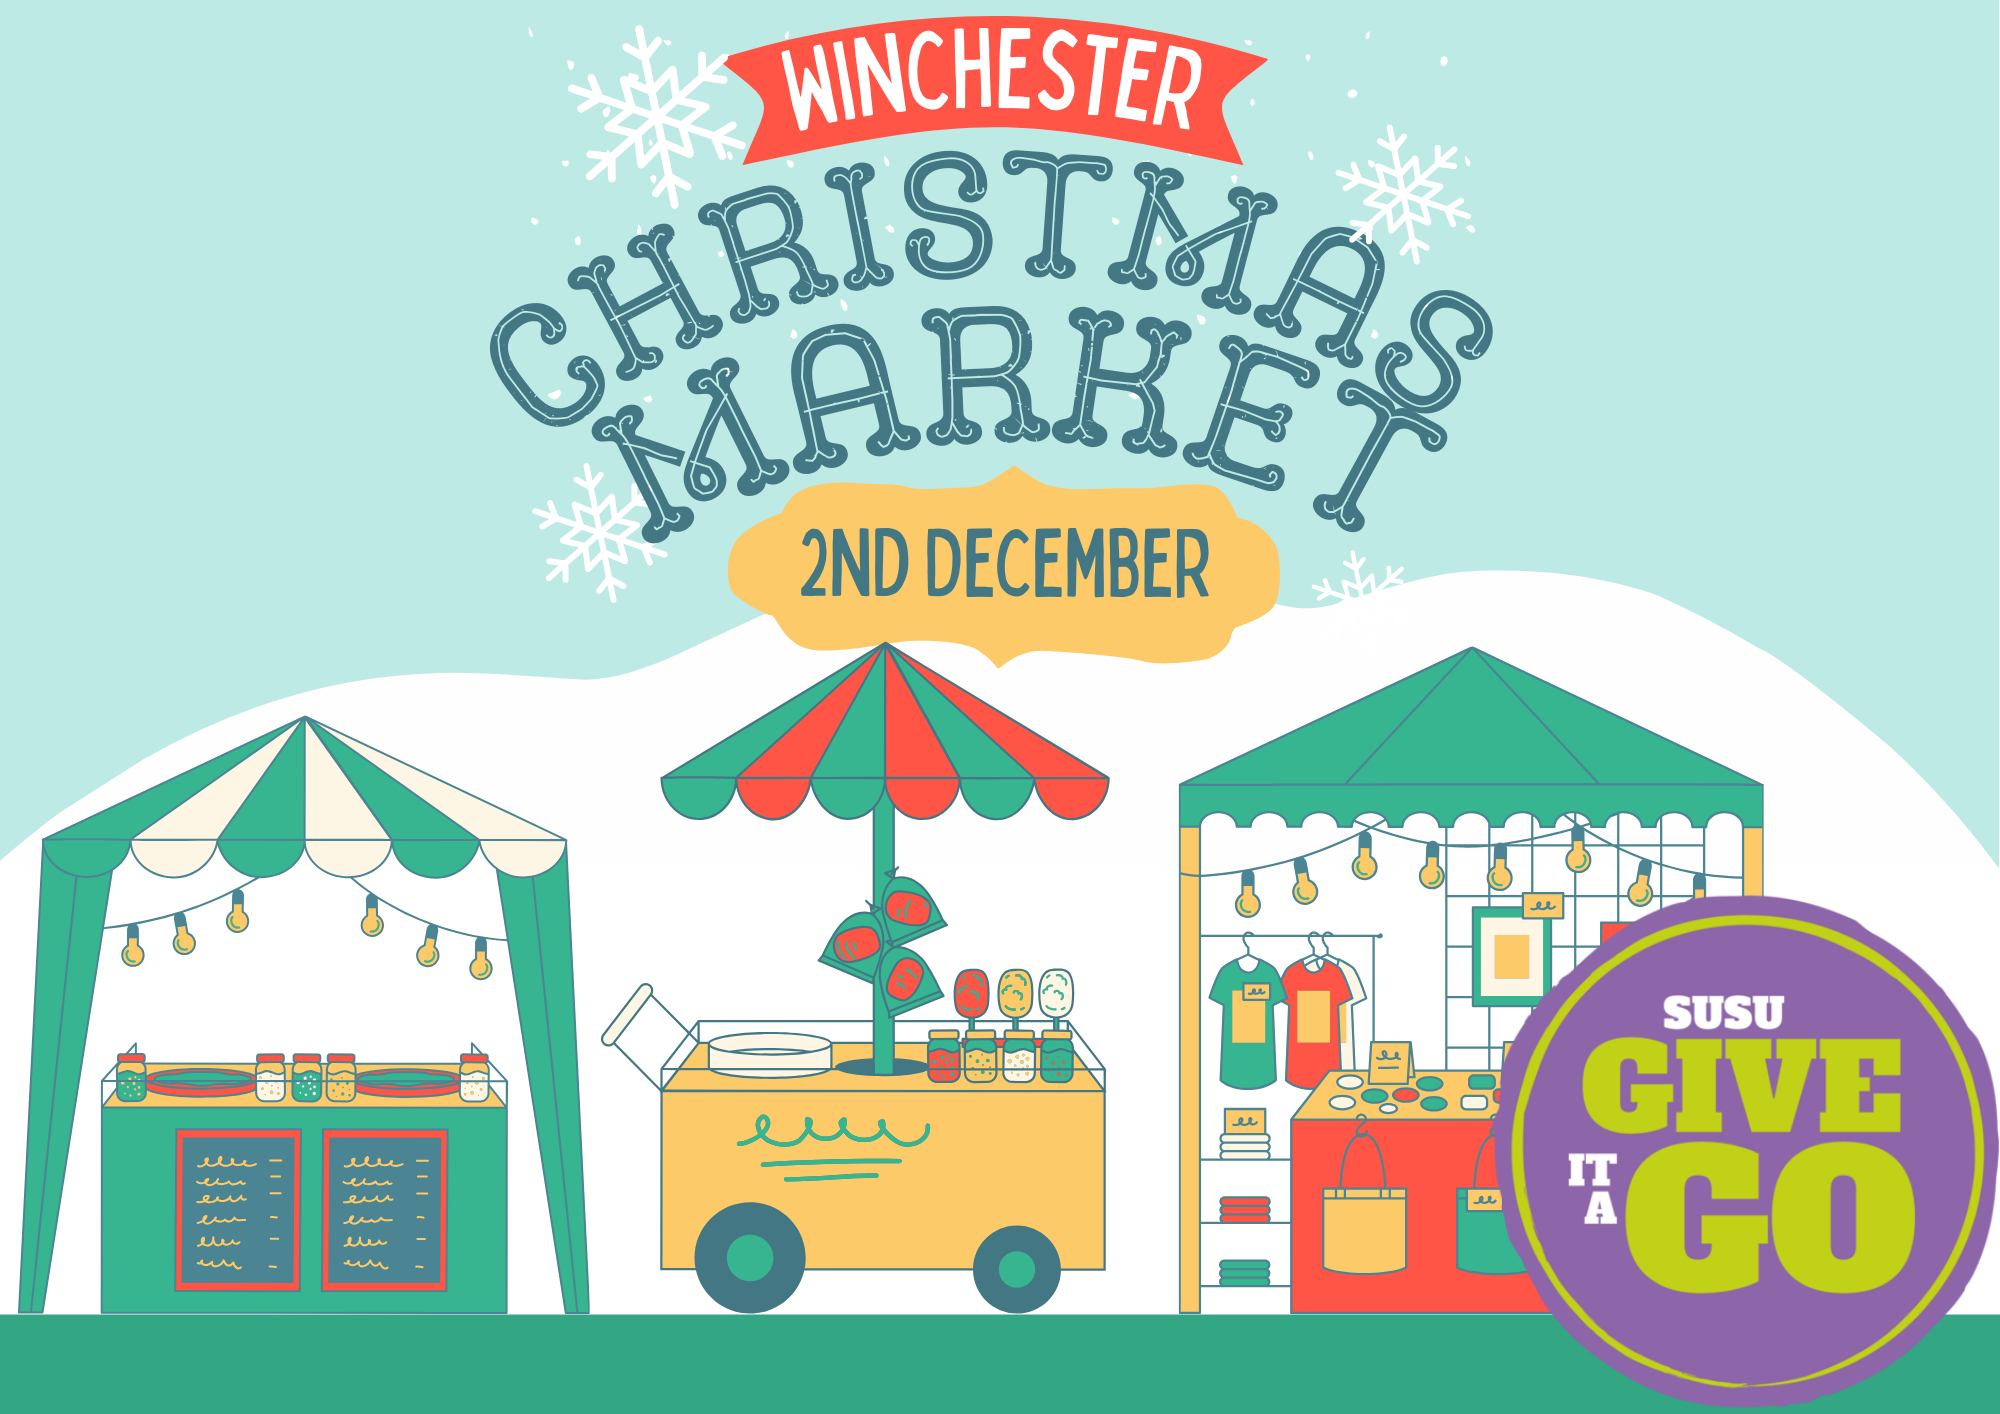 GIAG Come N Go: Winchester Christmas Market Visiting